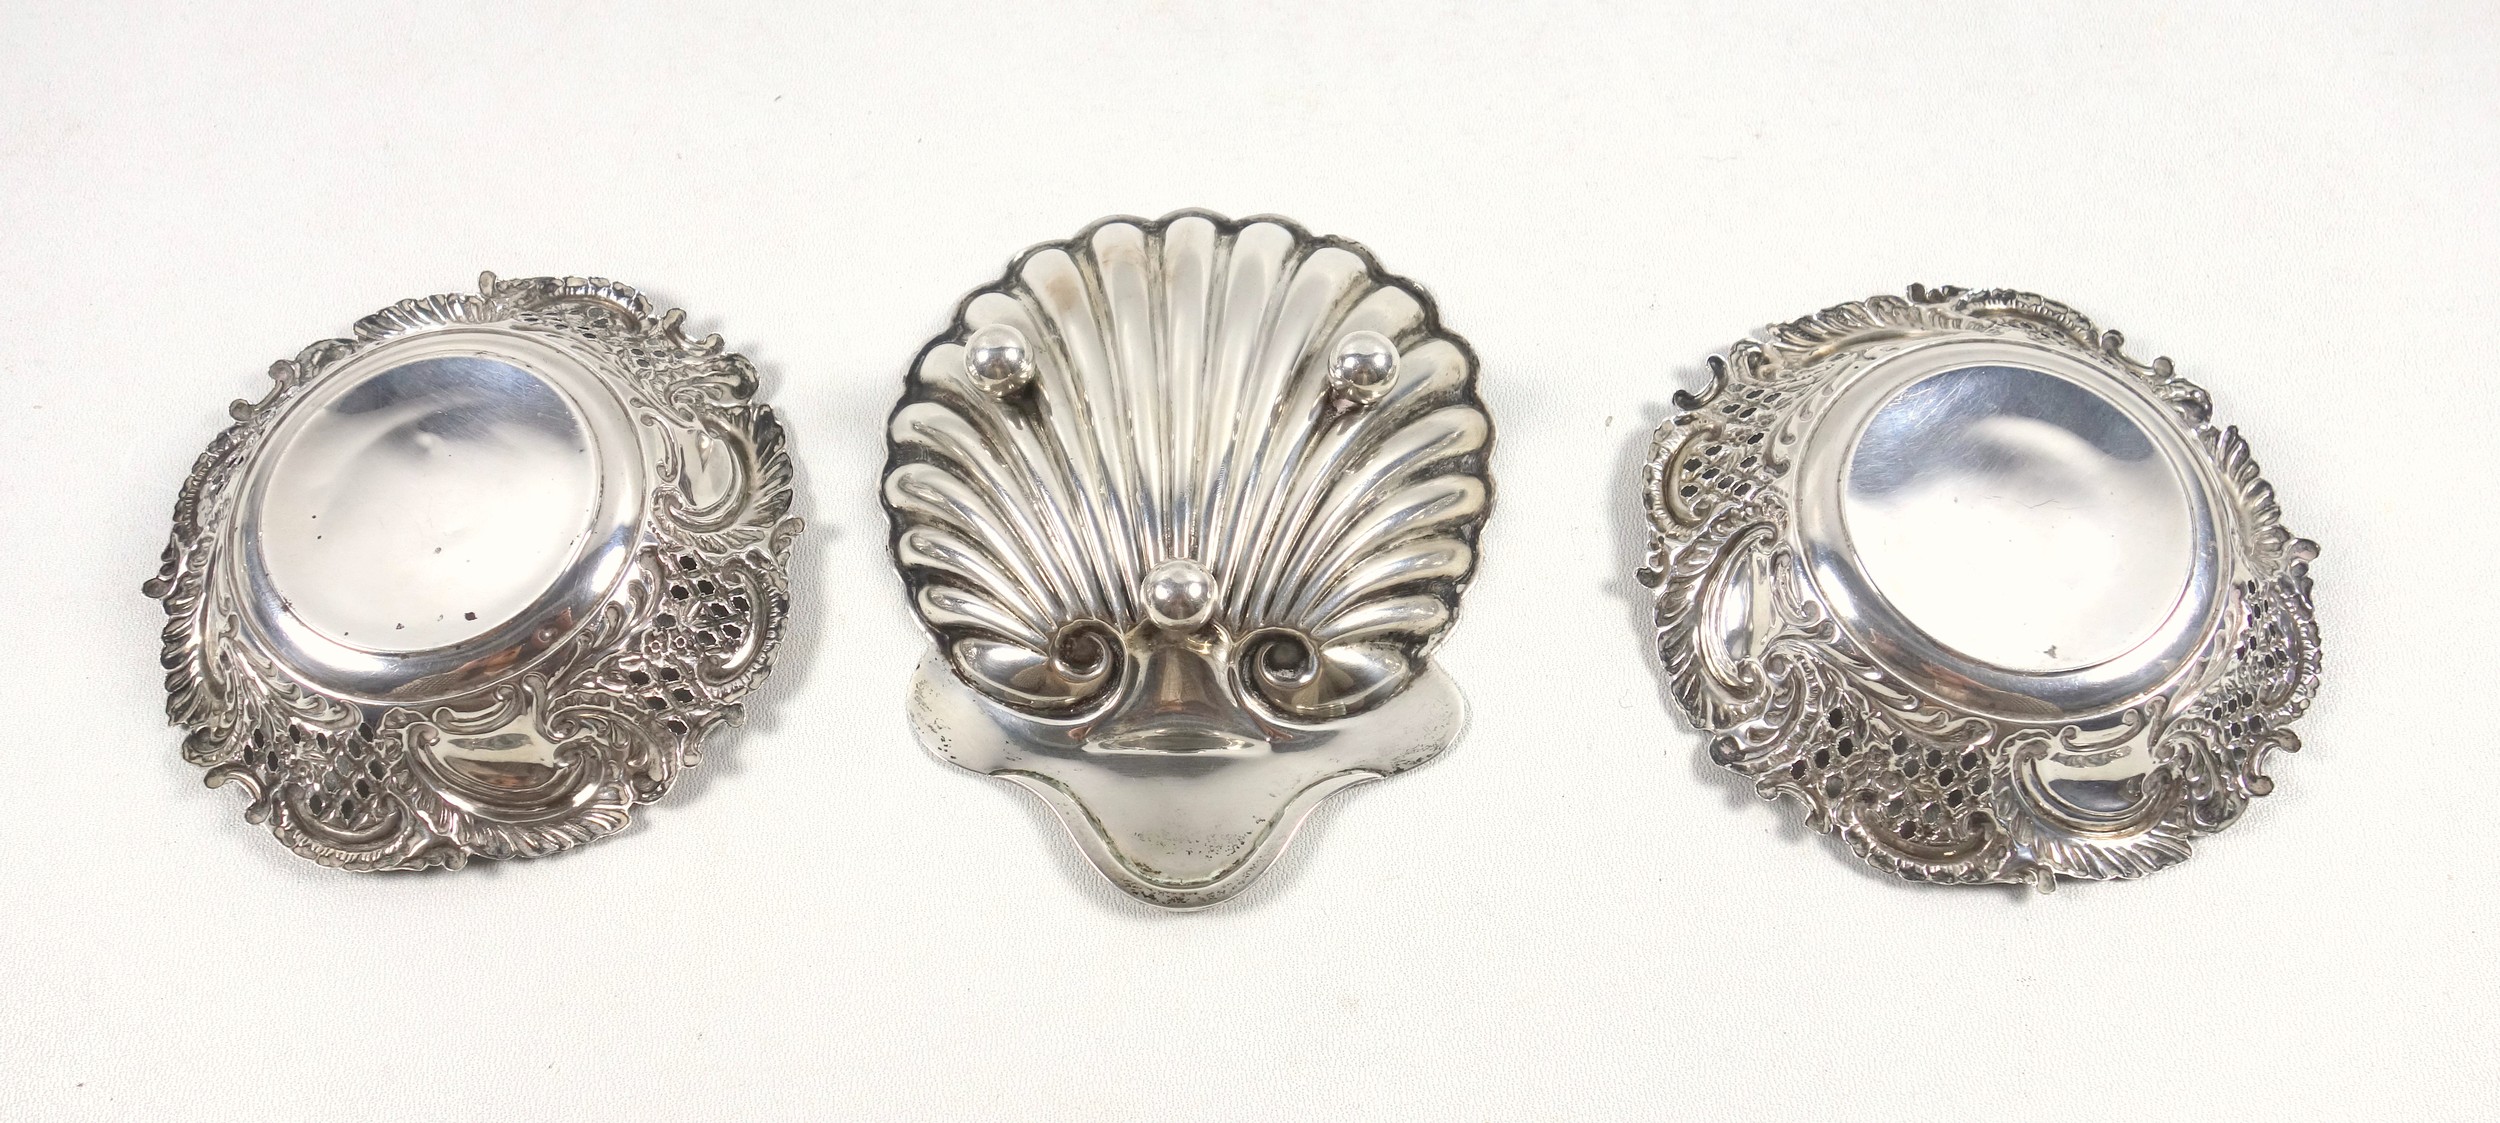 Pair of silver sweetmeat dishes with pierced and embossed scroll decoration, by John Gloster, - Image 3 of 6